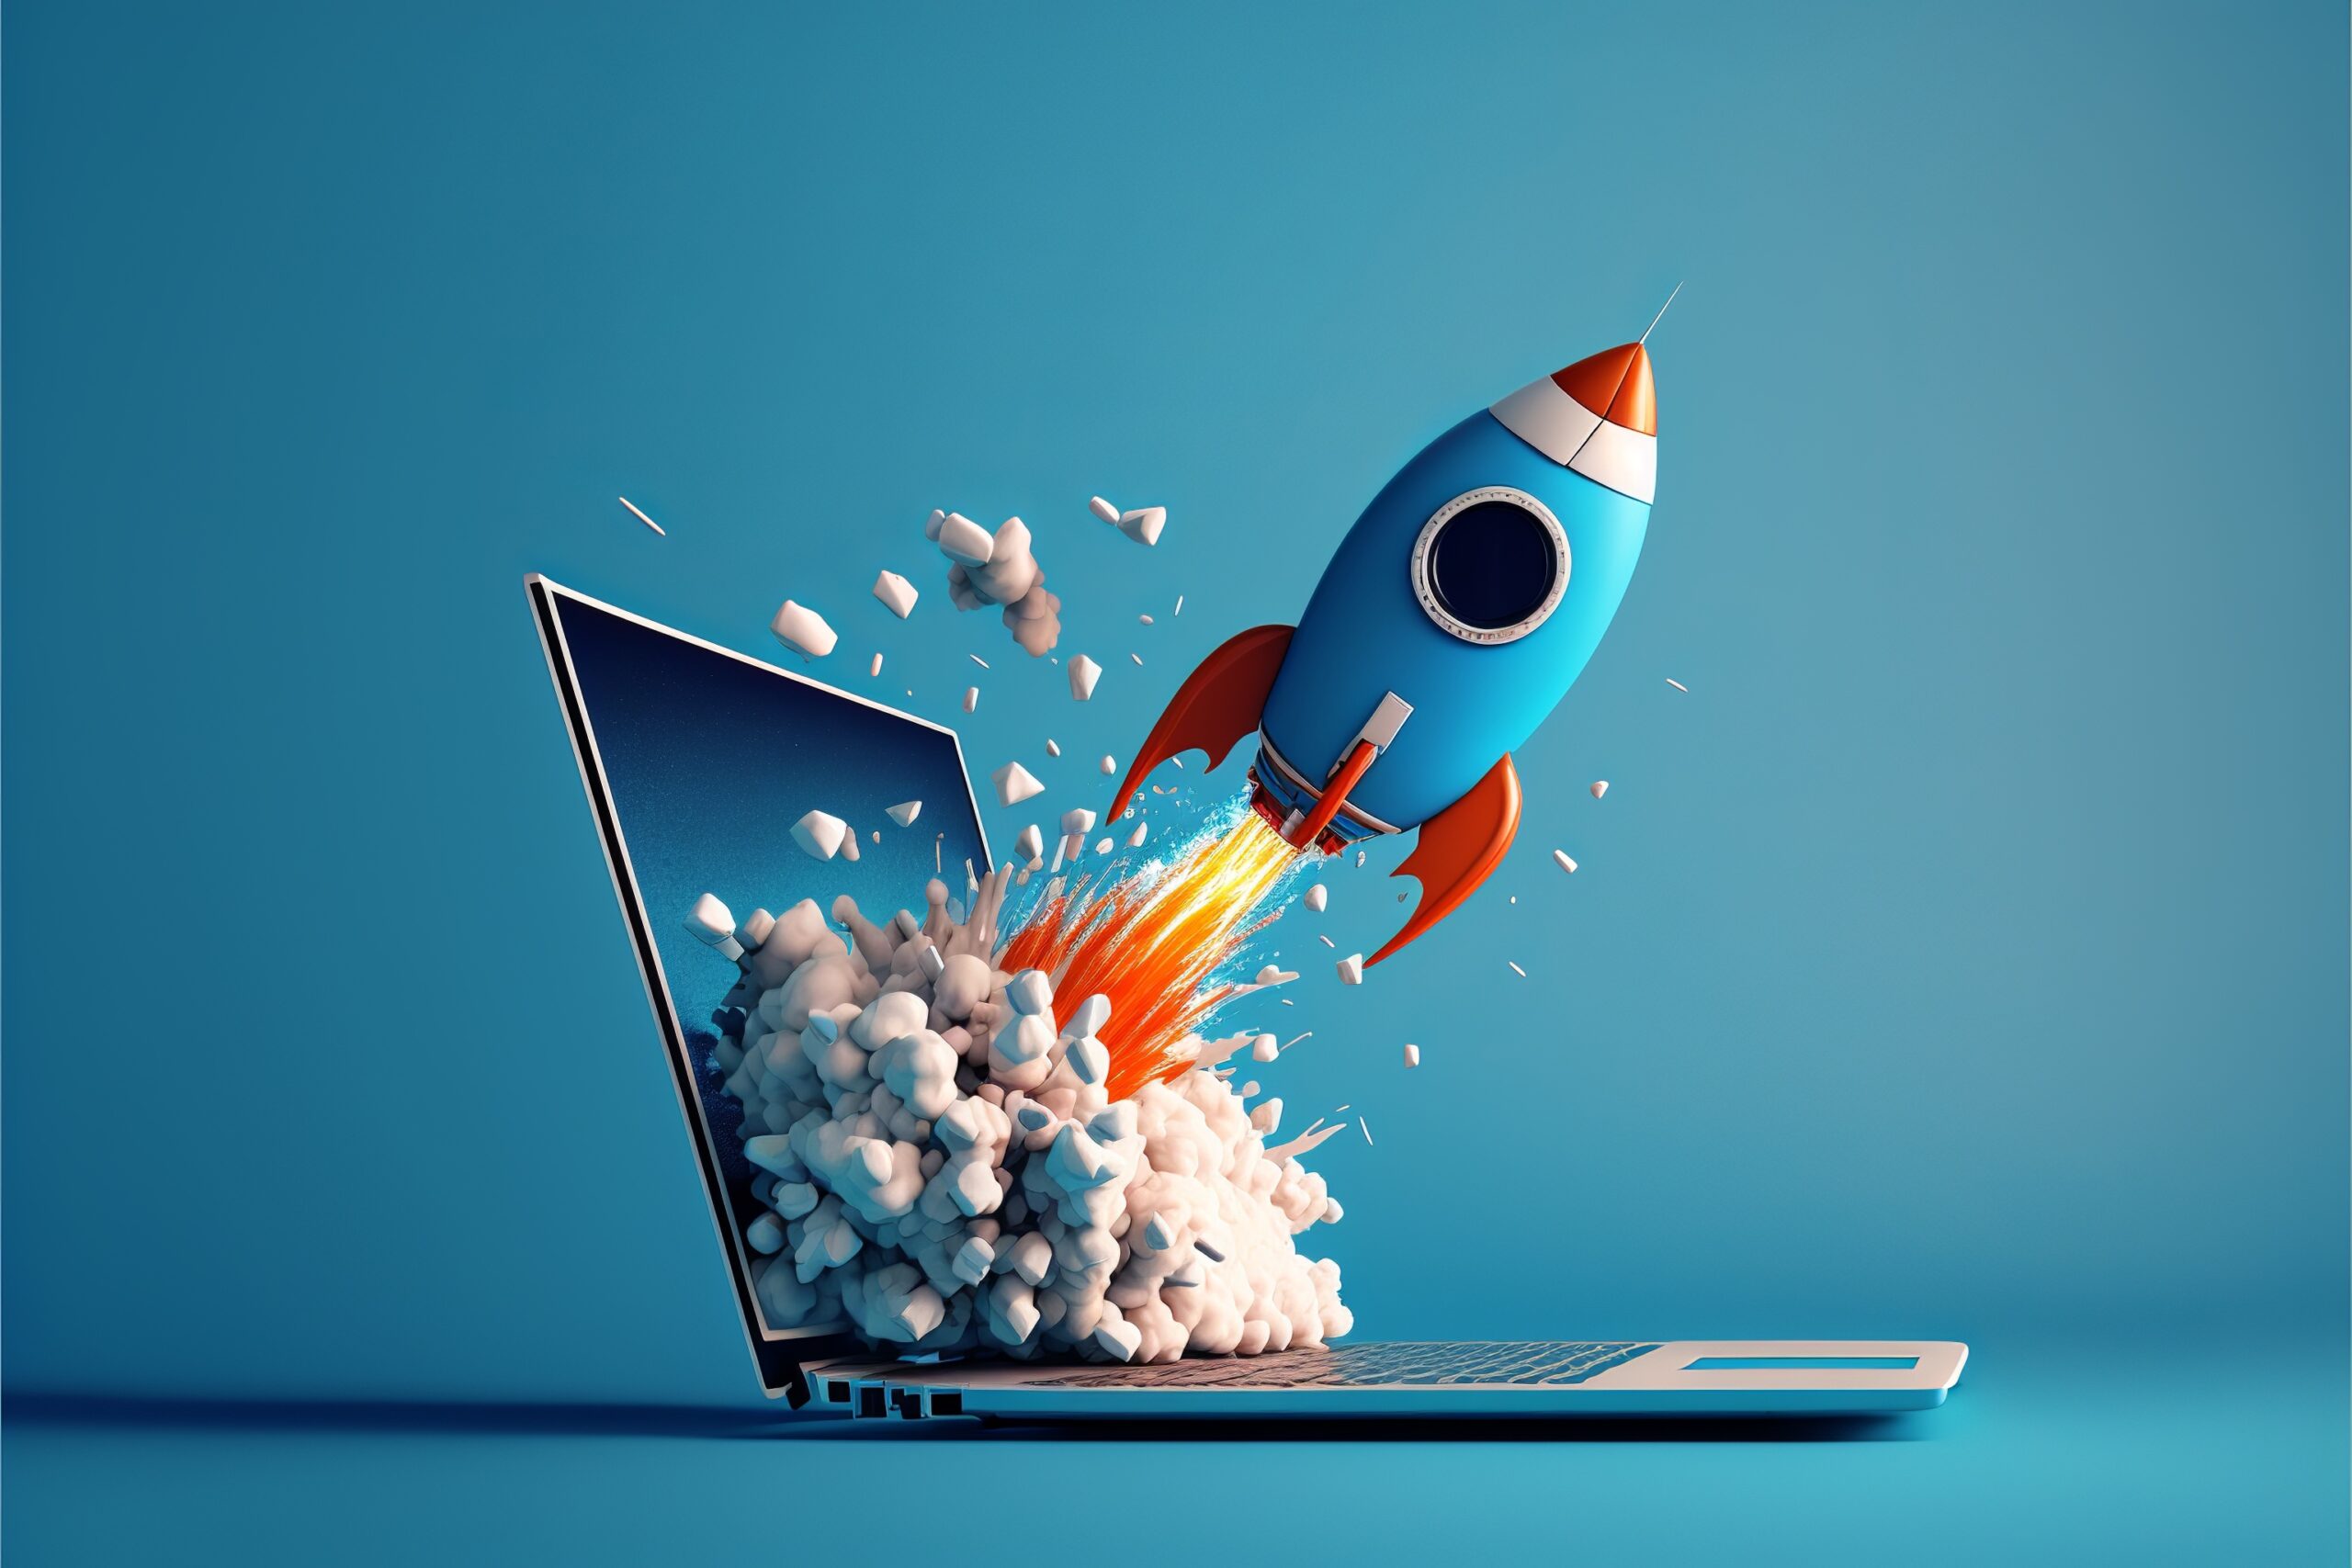 An illustration of a rocket launching from a laptop.